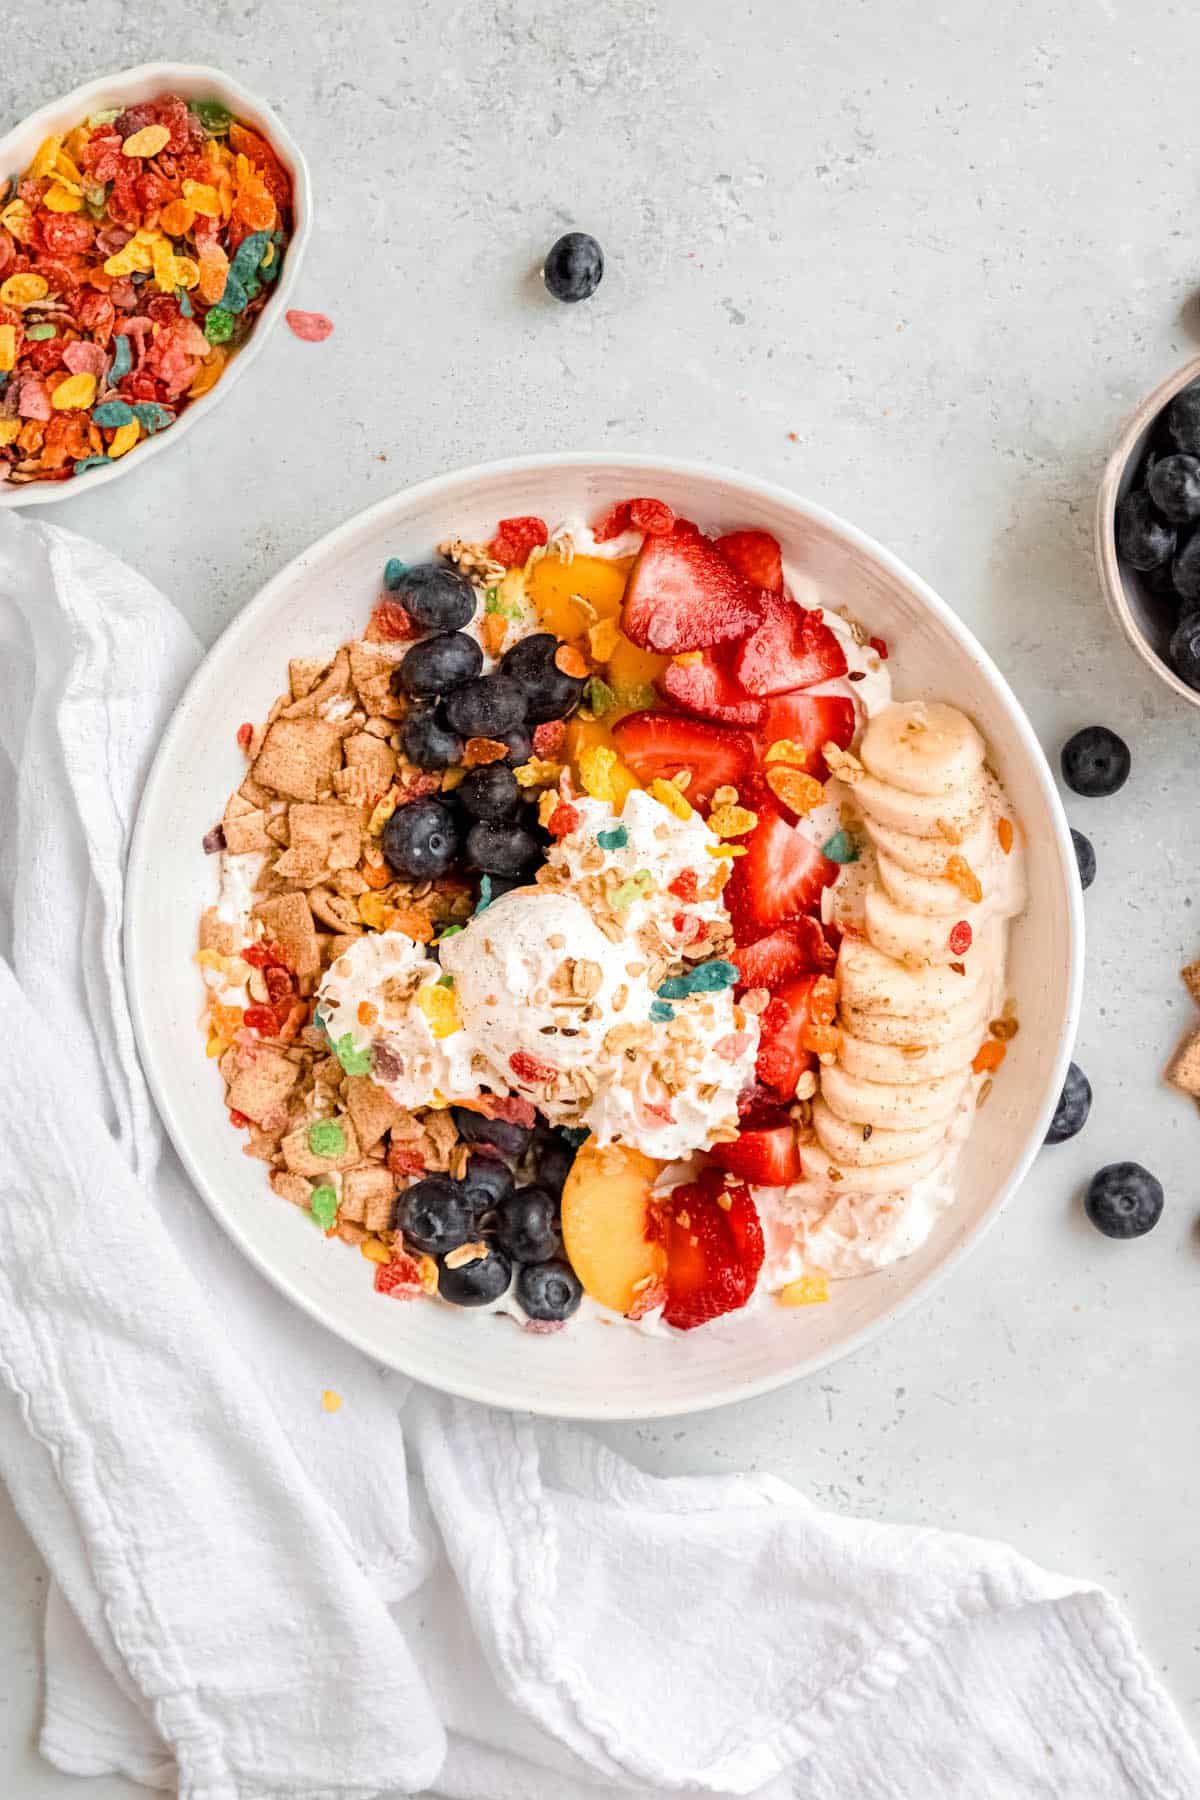 hero shot of breakfast banana split bowl with a bowl of fruity pebbles and a bowl of blueberries on the table.